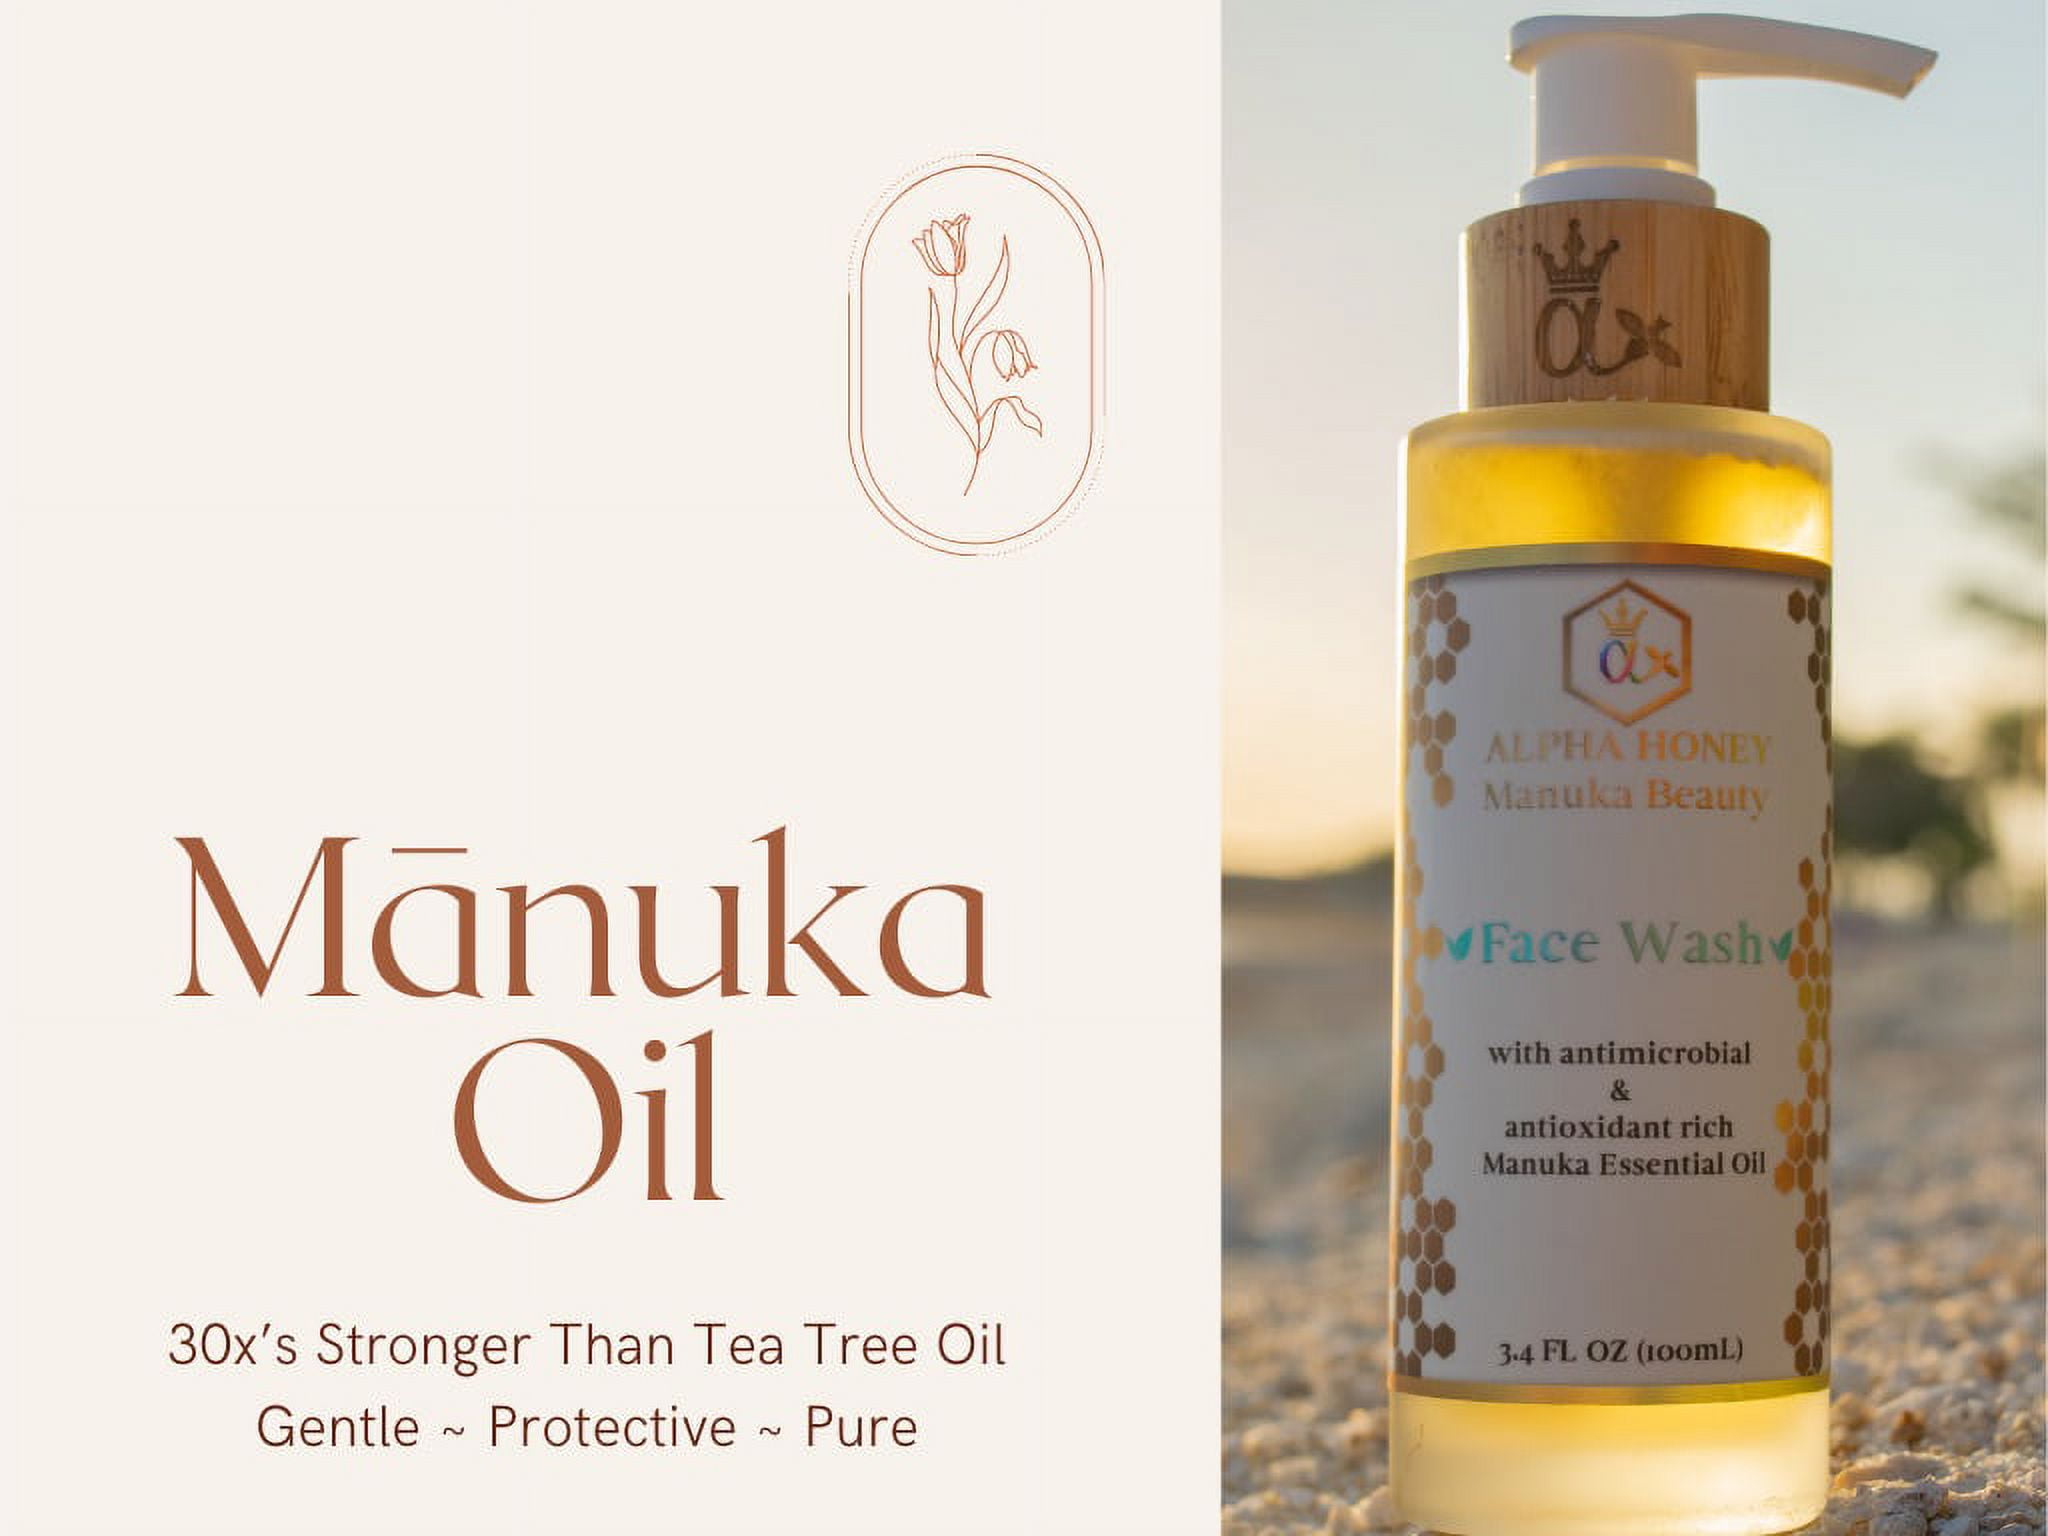 Manuka Honey Oil Cleanser (for face & body) now with PAPAYA SEED